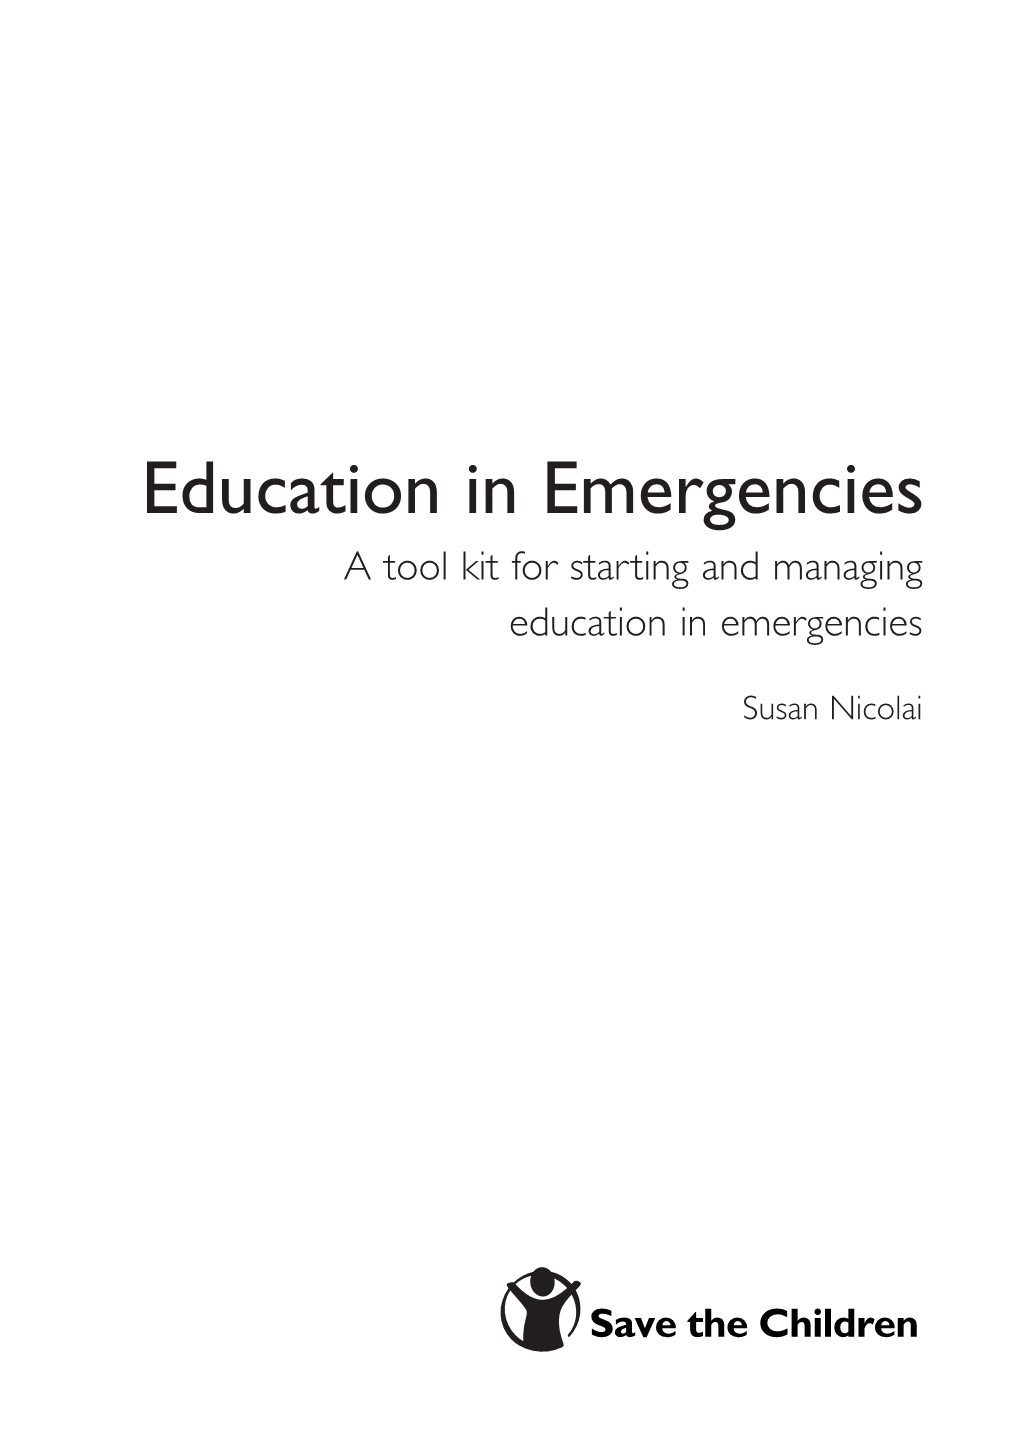 Education in Emergencies: a Tool Kit for Starting